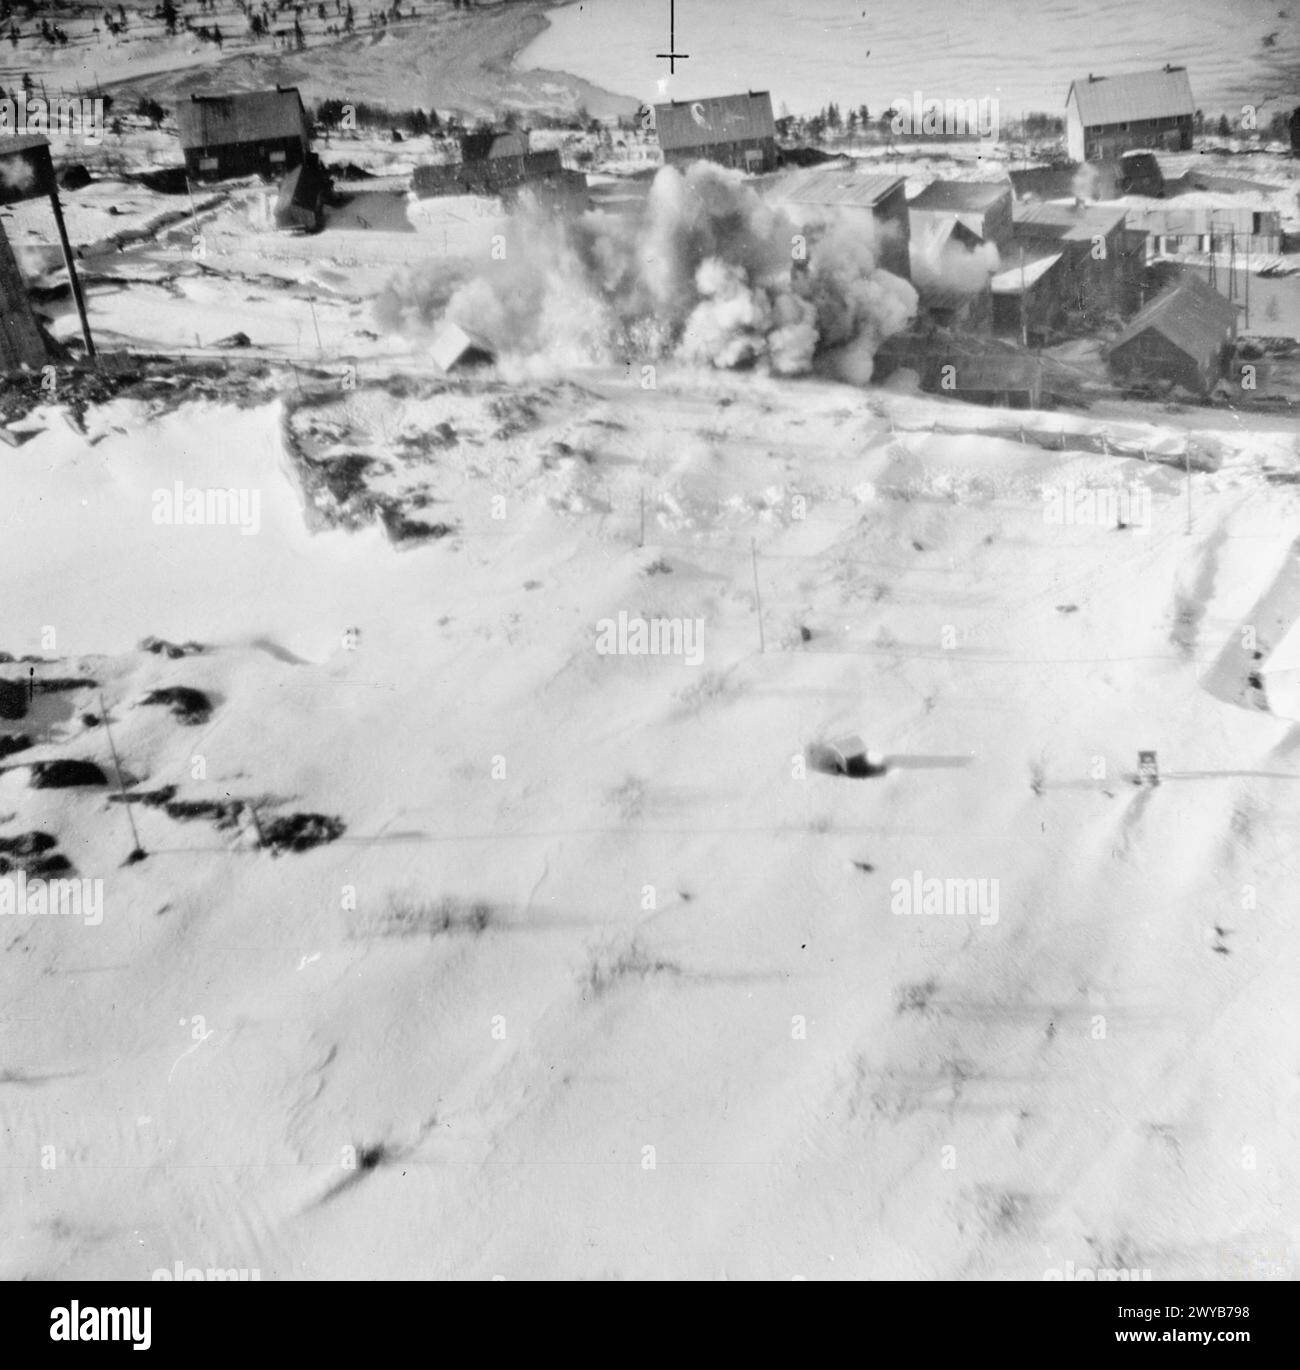 ROYAL AIR FORCE BOMBER COMMAND, 1942-1945. - Oblique aerial photograph taken during a low-level daylight attack on the molybdenum mine at Knaben, Norway, by 10 De Havilland Mosquito B Mark IVs of No. 139 Squadron RAF, led by its Commanding Officer, Wing Commander P Shand. Smoke from exploding bombs is seen pouring from the washing plant during the raid. The attack was successful, but one aircraft was shot down by German fighters. , Royal Air Force, 139 Squadron, Royal Air Force, 2 Group Stock Photo